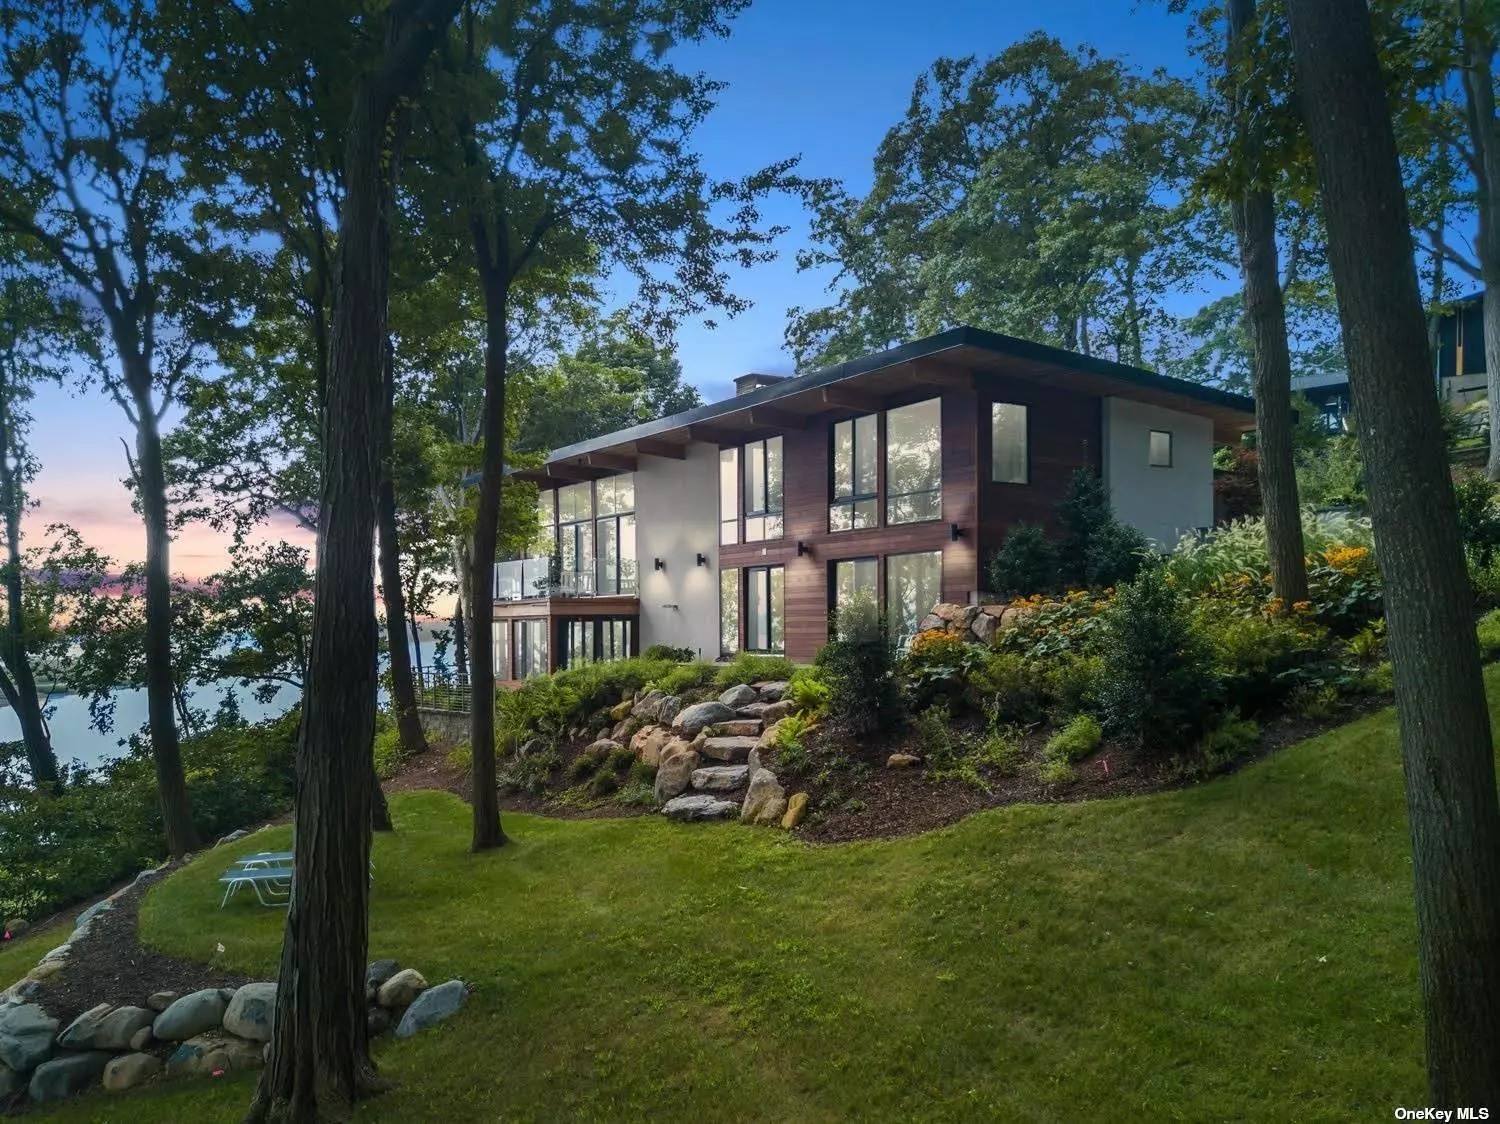 This irreplaceable waterfront home is perched on a gentle bluff with sweeping vistas. A 1955 True Mid-Century Classic Designed by Architect Keith I. Hibner & completely renovated to perfection with all the original elements left in place by the current owners.The sleek design is a hallmark of Mid-Century aesthetic.The dramatic entry takes one to the unparalleled, panoramic views from every vantage point in the home. This once in a lifetime living experience offers a stunning sunken living room with white oak flooring & a floor to ceiling wood burning fireplace with original stone facade & mantel. Access the outdoor deck and sitting area, where one can relax & unwind only steps away from 500&rsquo; of your own private waterfront with beautiful sandy beach & mooring. Entertain with ease in this state-of-the art Henrybuilt kitchen with sliders to the Ipe decking, fire pit, barbecue & unobstructed western views that allow an indoor/outdoor living, dining experience all year round. CSH SD#2